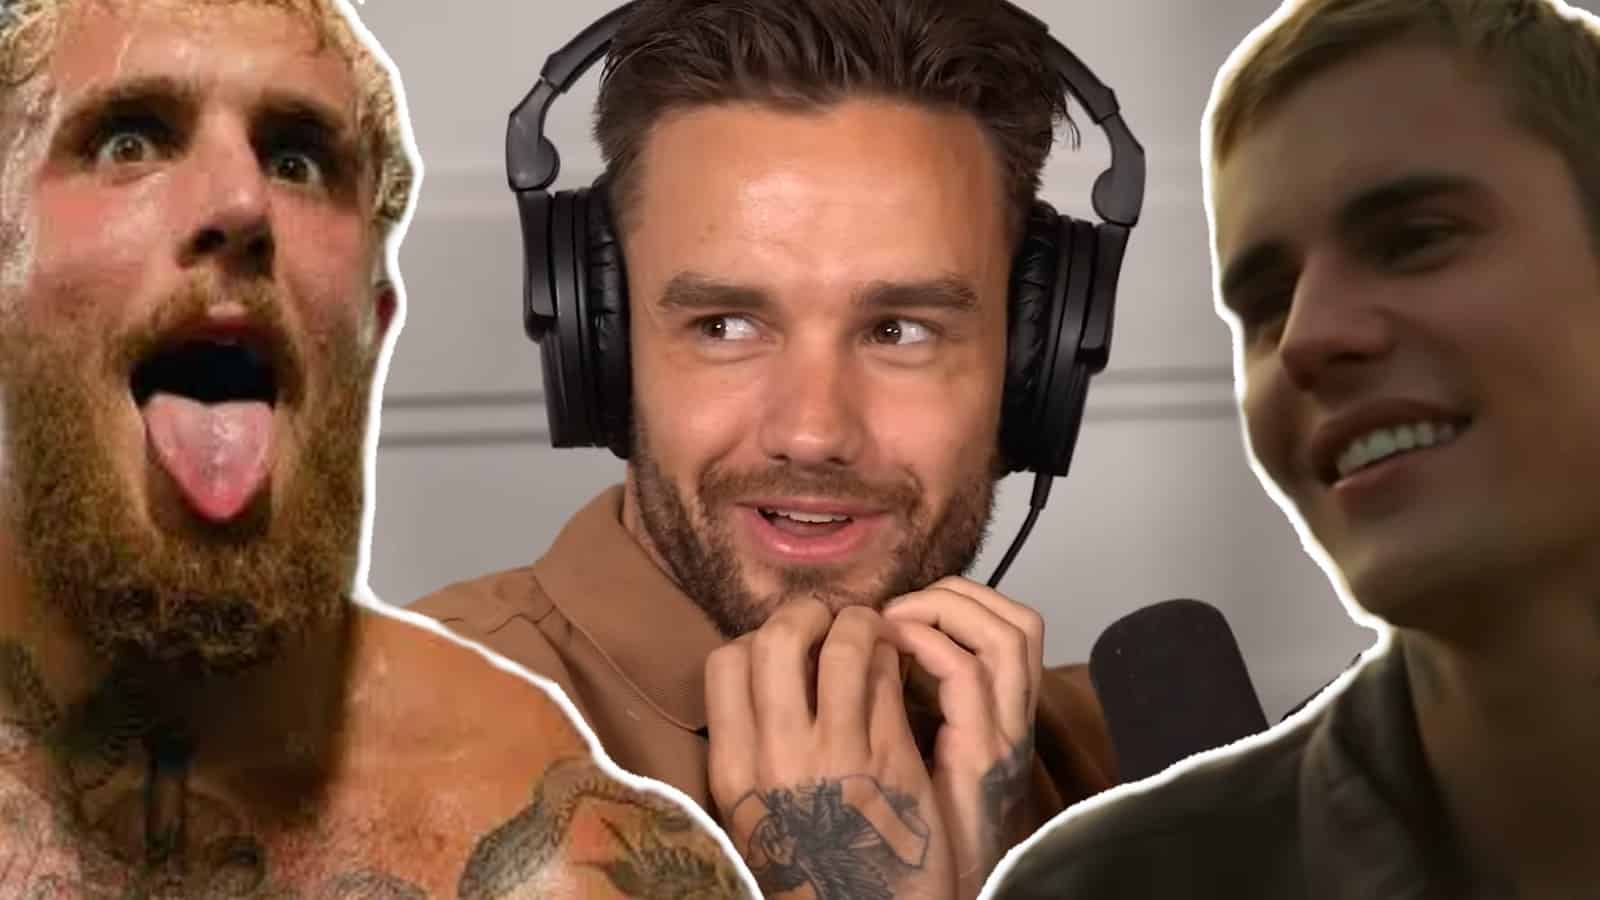 Liam Payne IMPAULSIVE interview with Jake Paul picture and Justin Bieber 'Ghost' music video screenshot